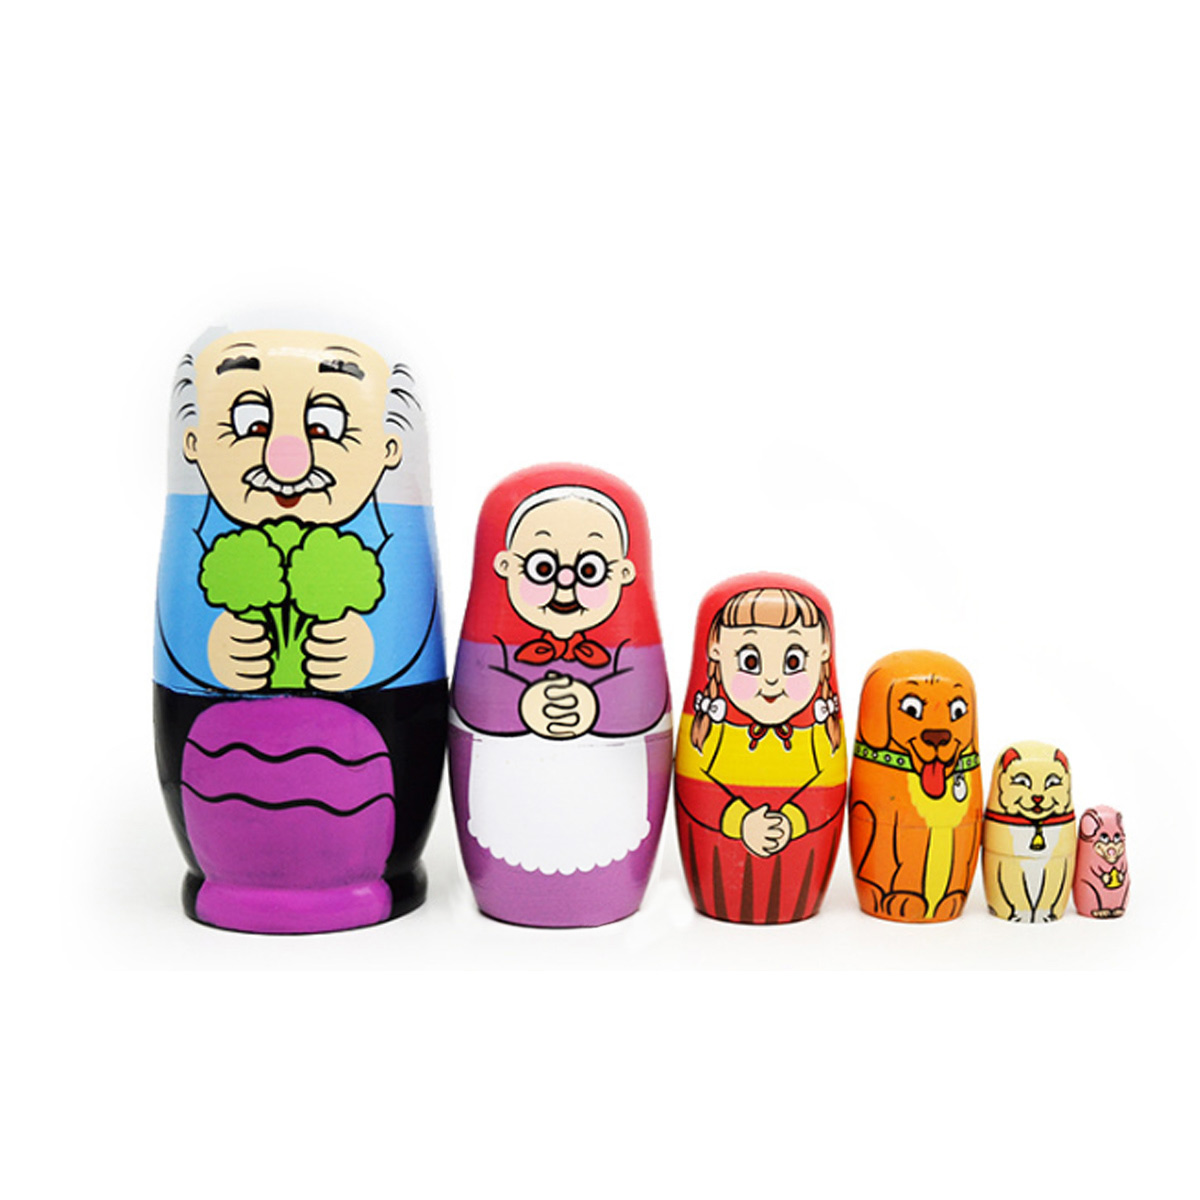 

6PCS Russian Wooden Nesting Doll Happy Family Handcraft Decoration Christmas Gifts